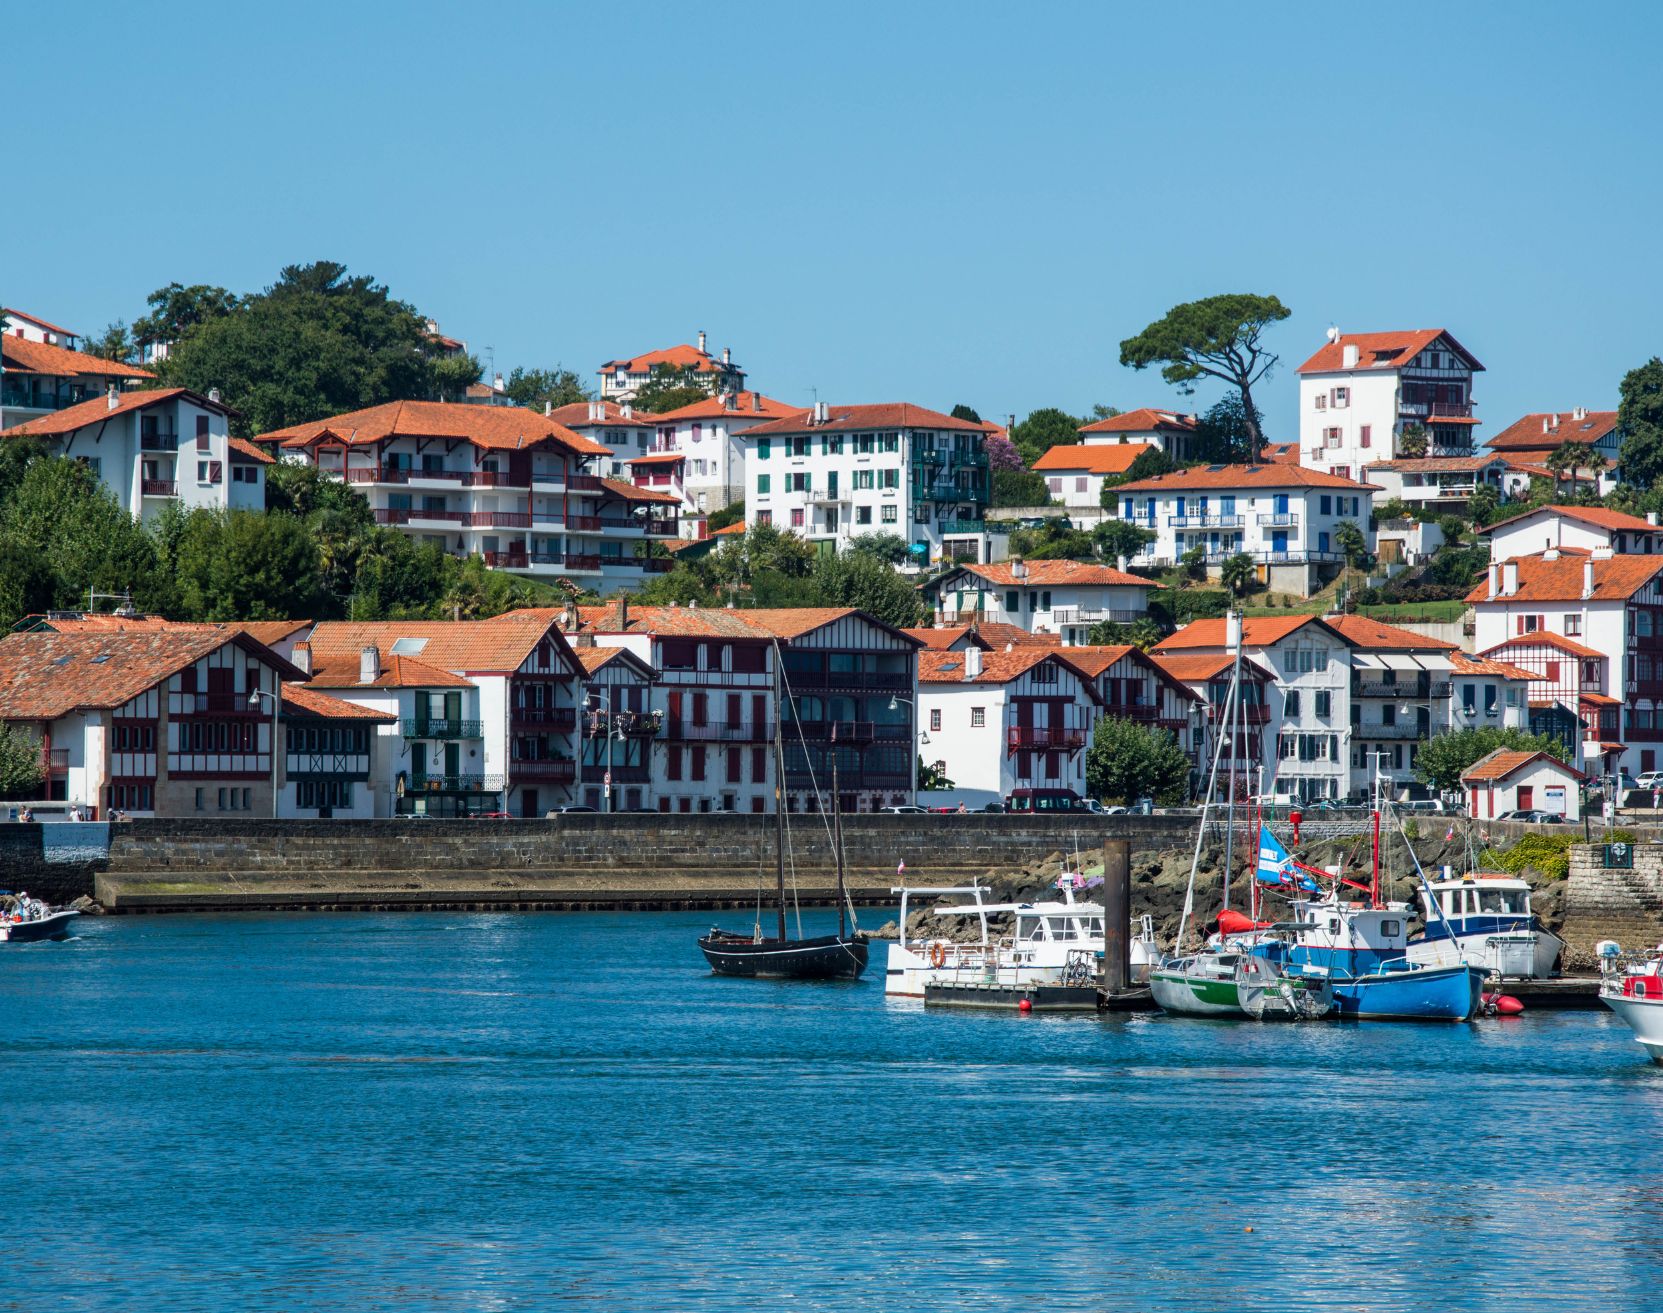 Private Tour of Biarritz, Bayonne and Saint-Jean-de-Luz from Bilbao